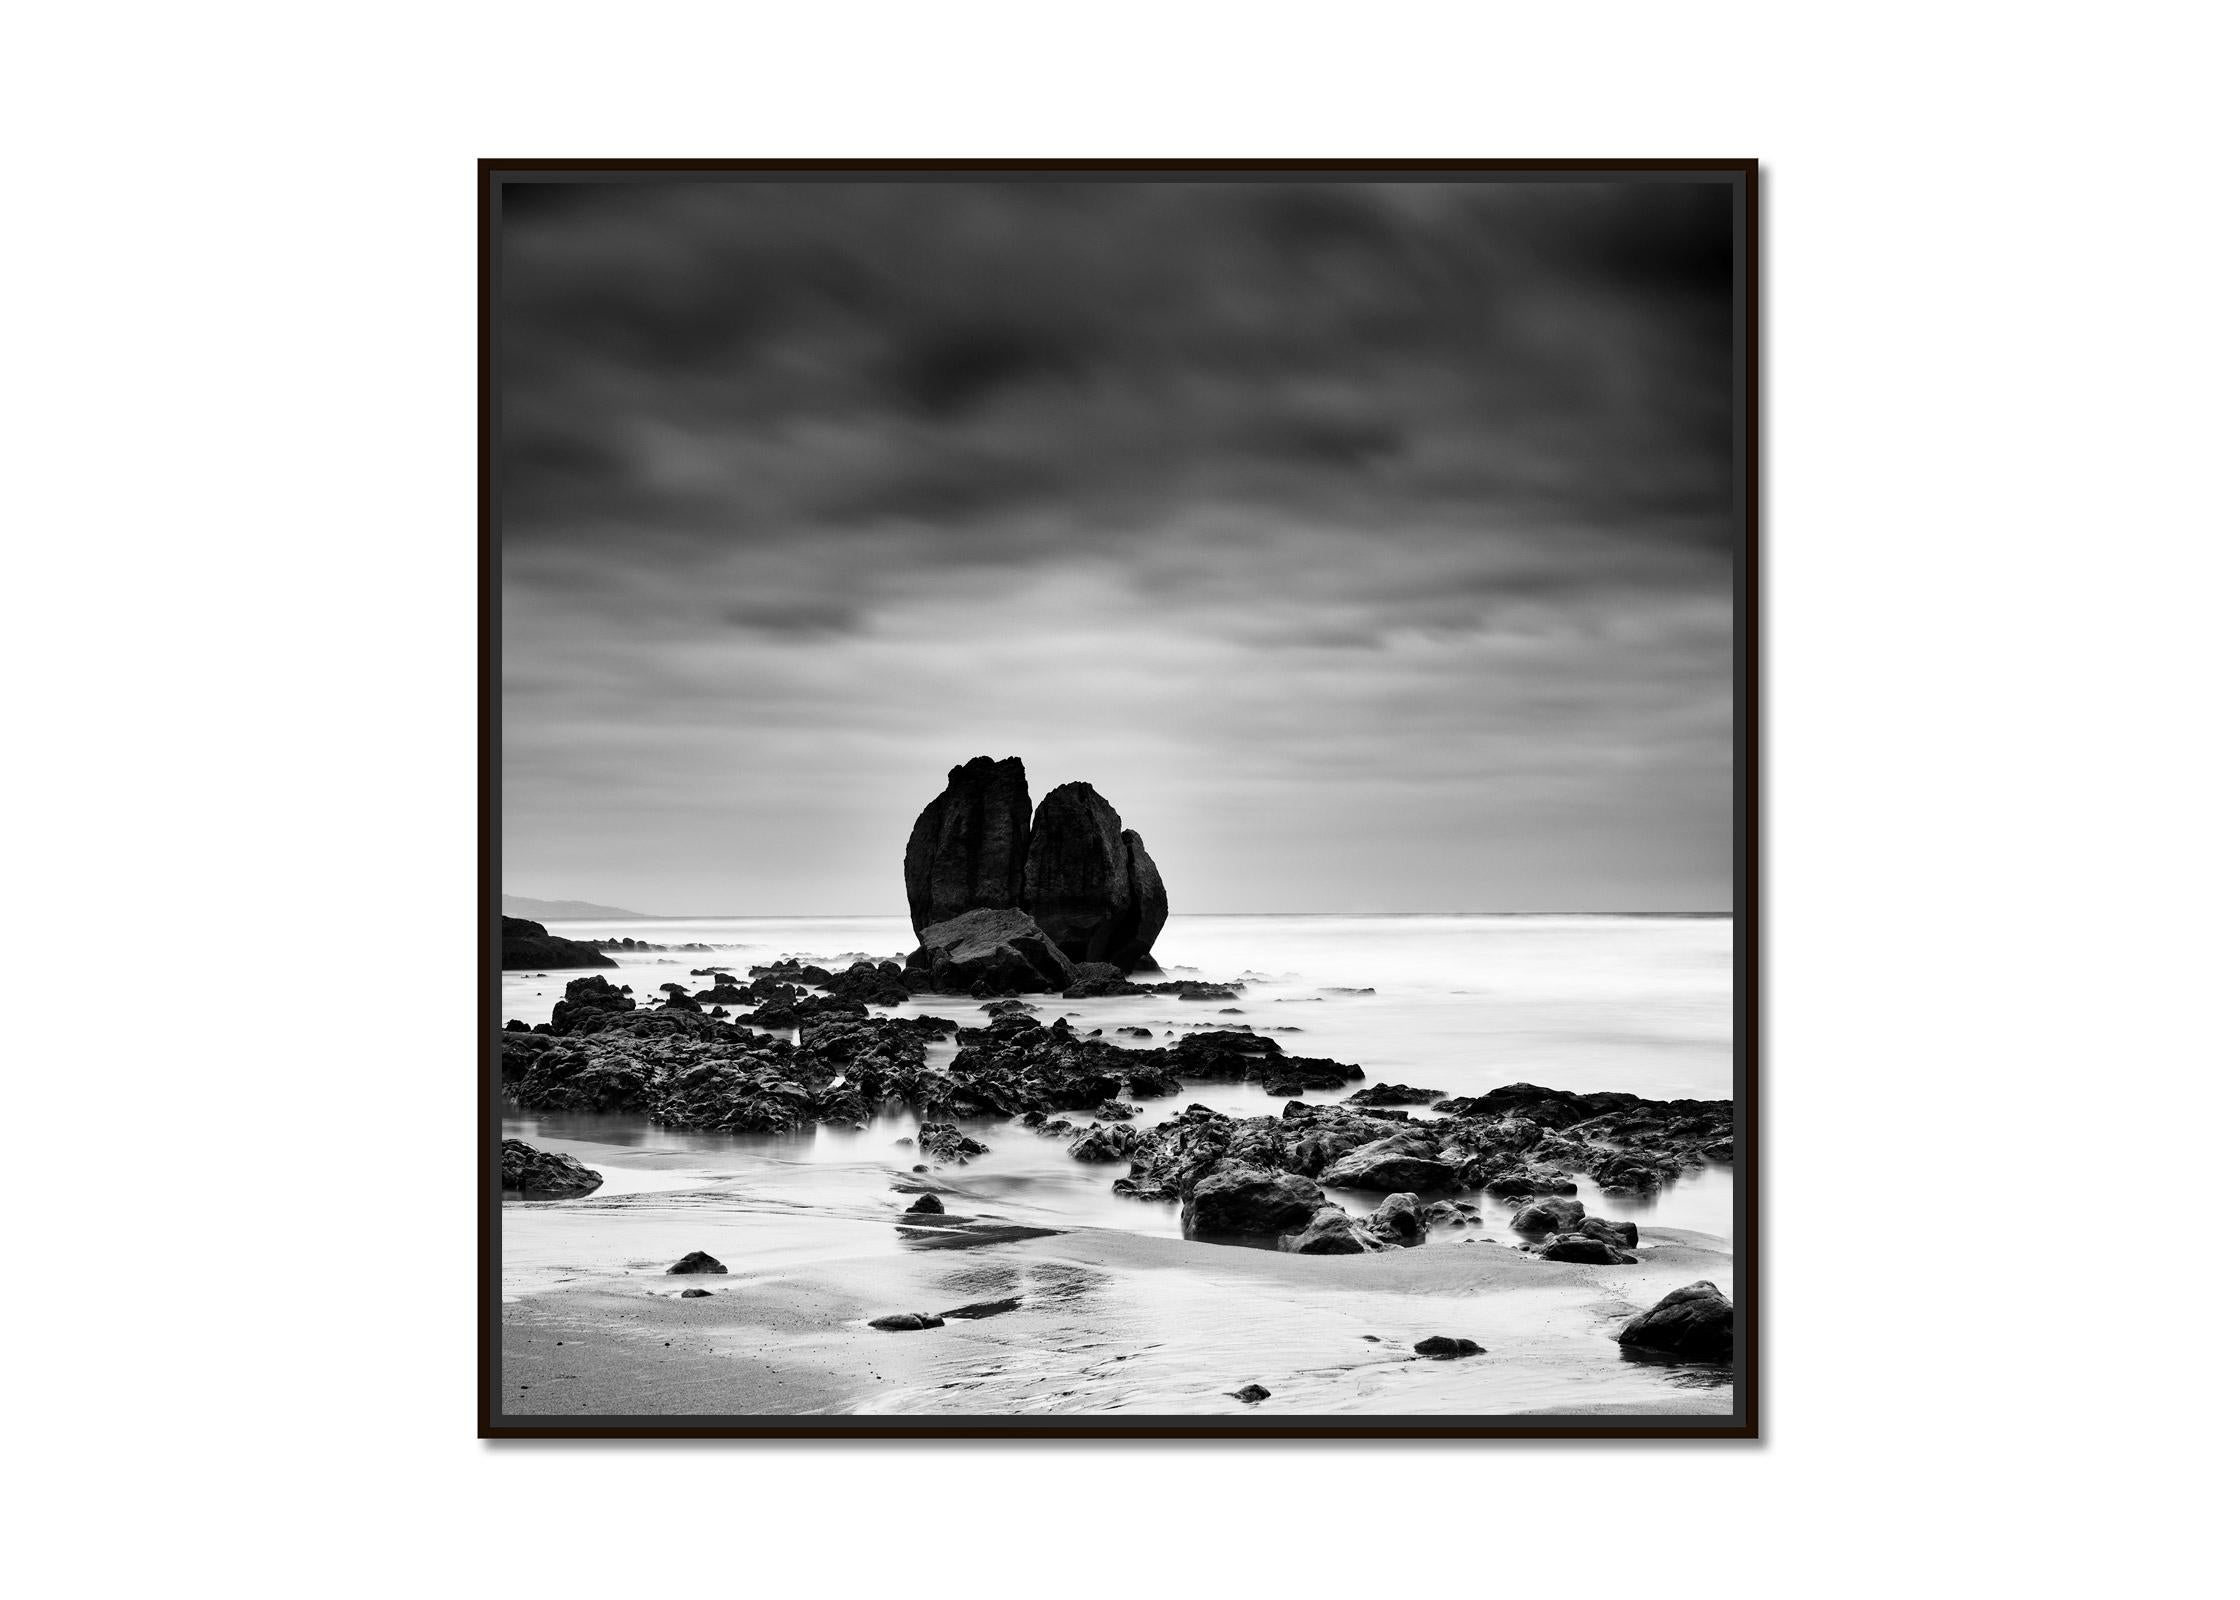 Rocks on the Shore, sandy beach, black and white fine art photography, landscape - Photograph by Gerald Berghammer